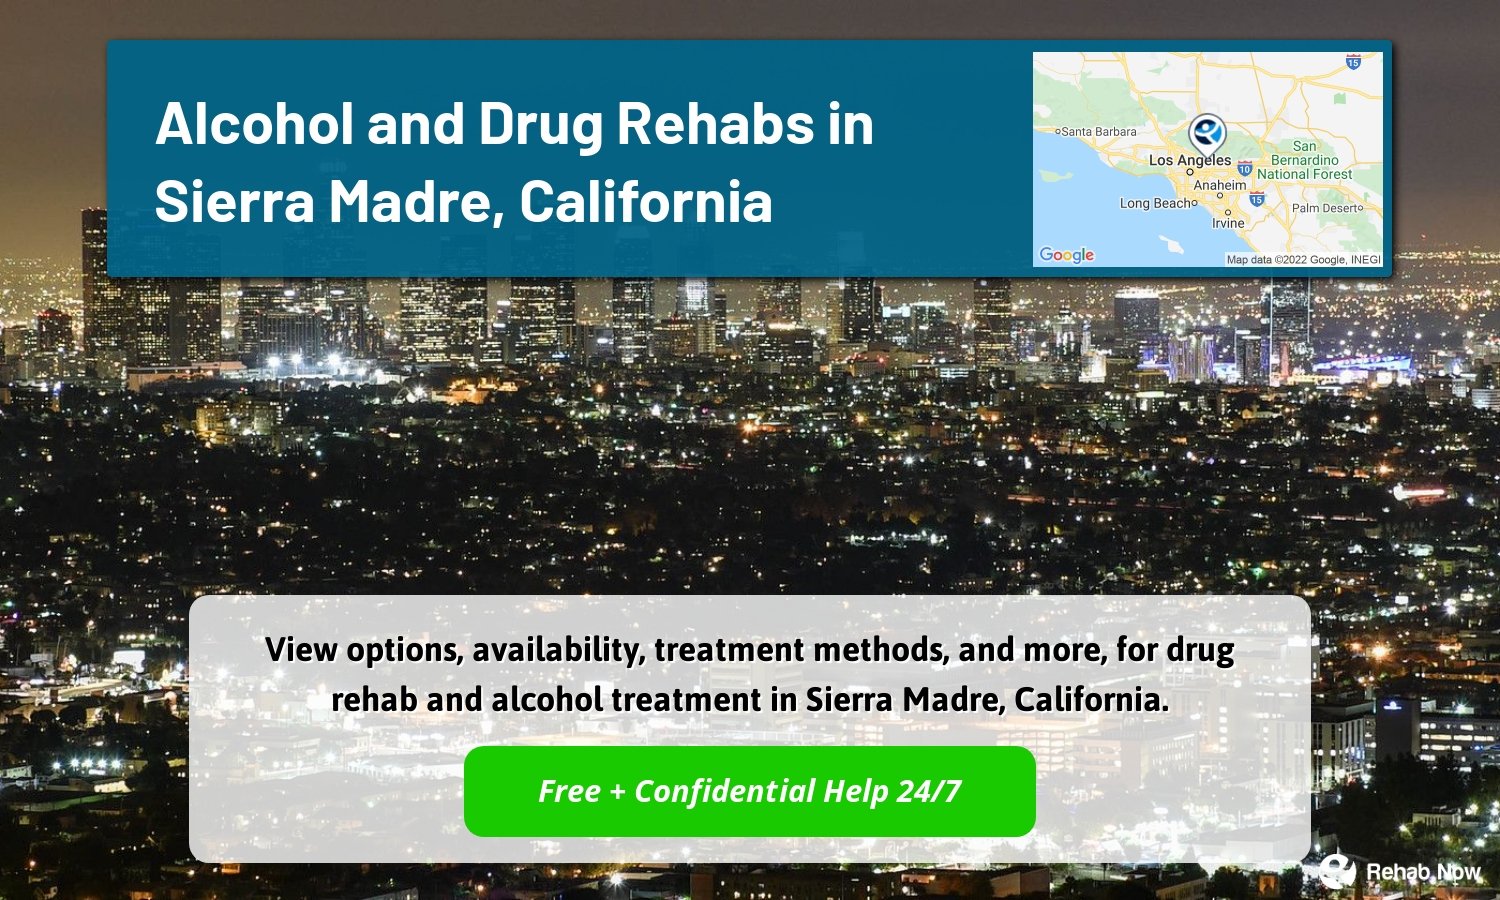 View options, availability, treatment methods, and more, for drug rehab and alcohol treatment in Sierra Madre, California.